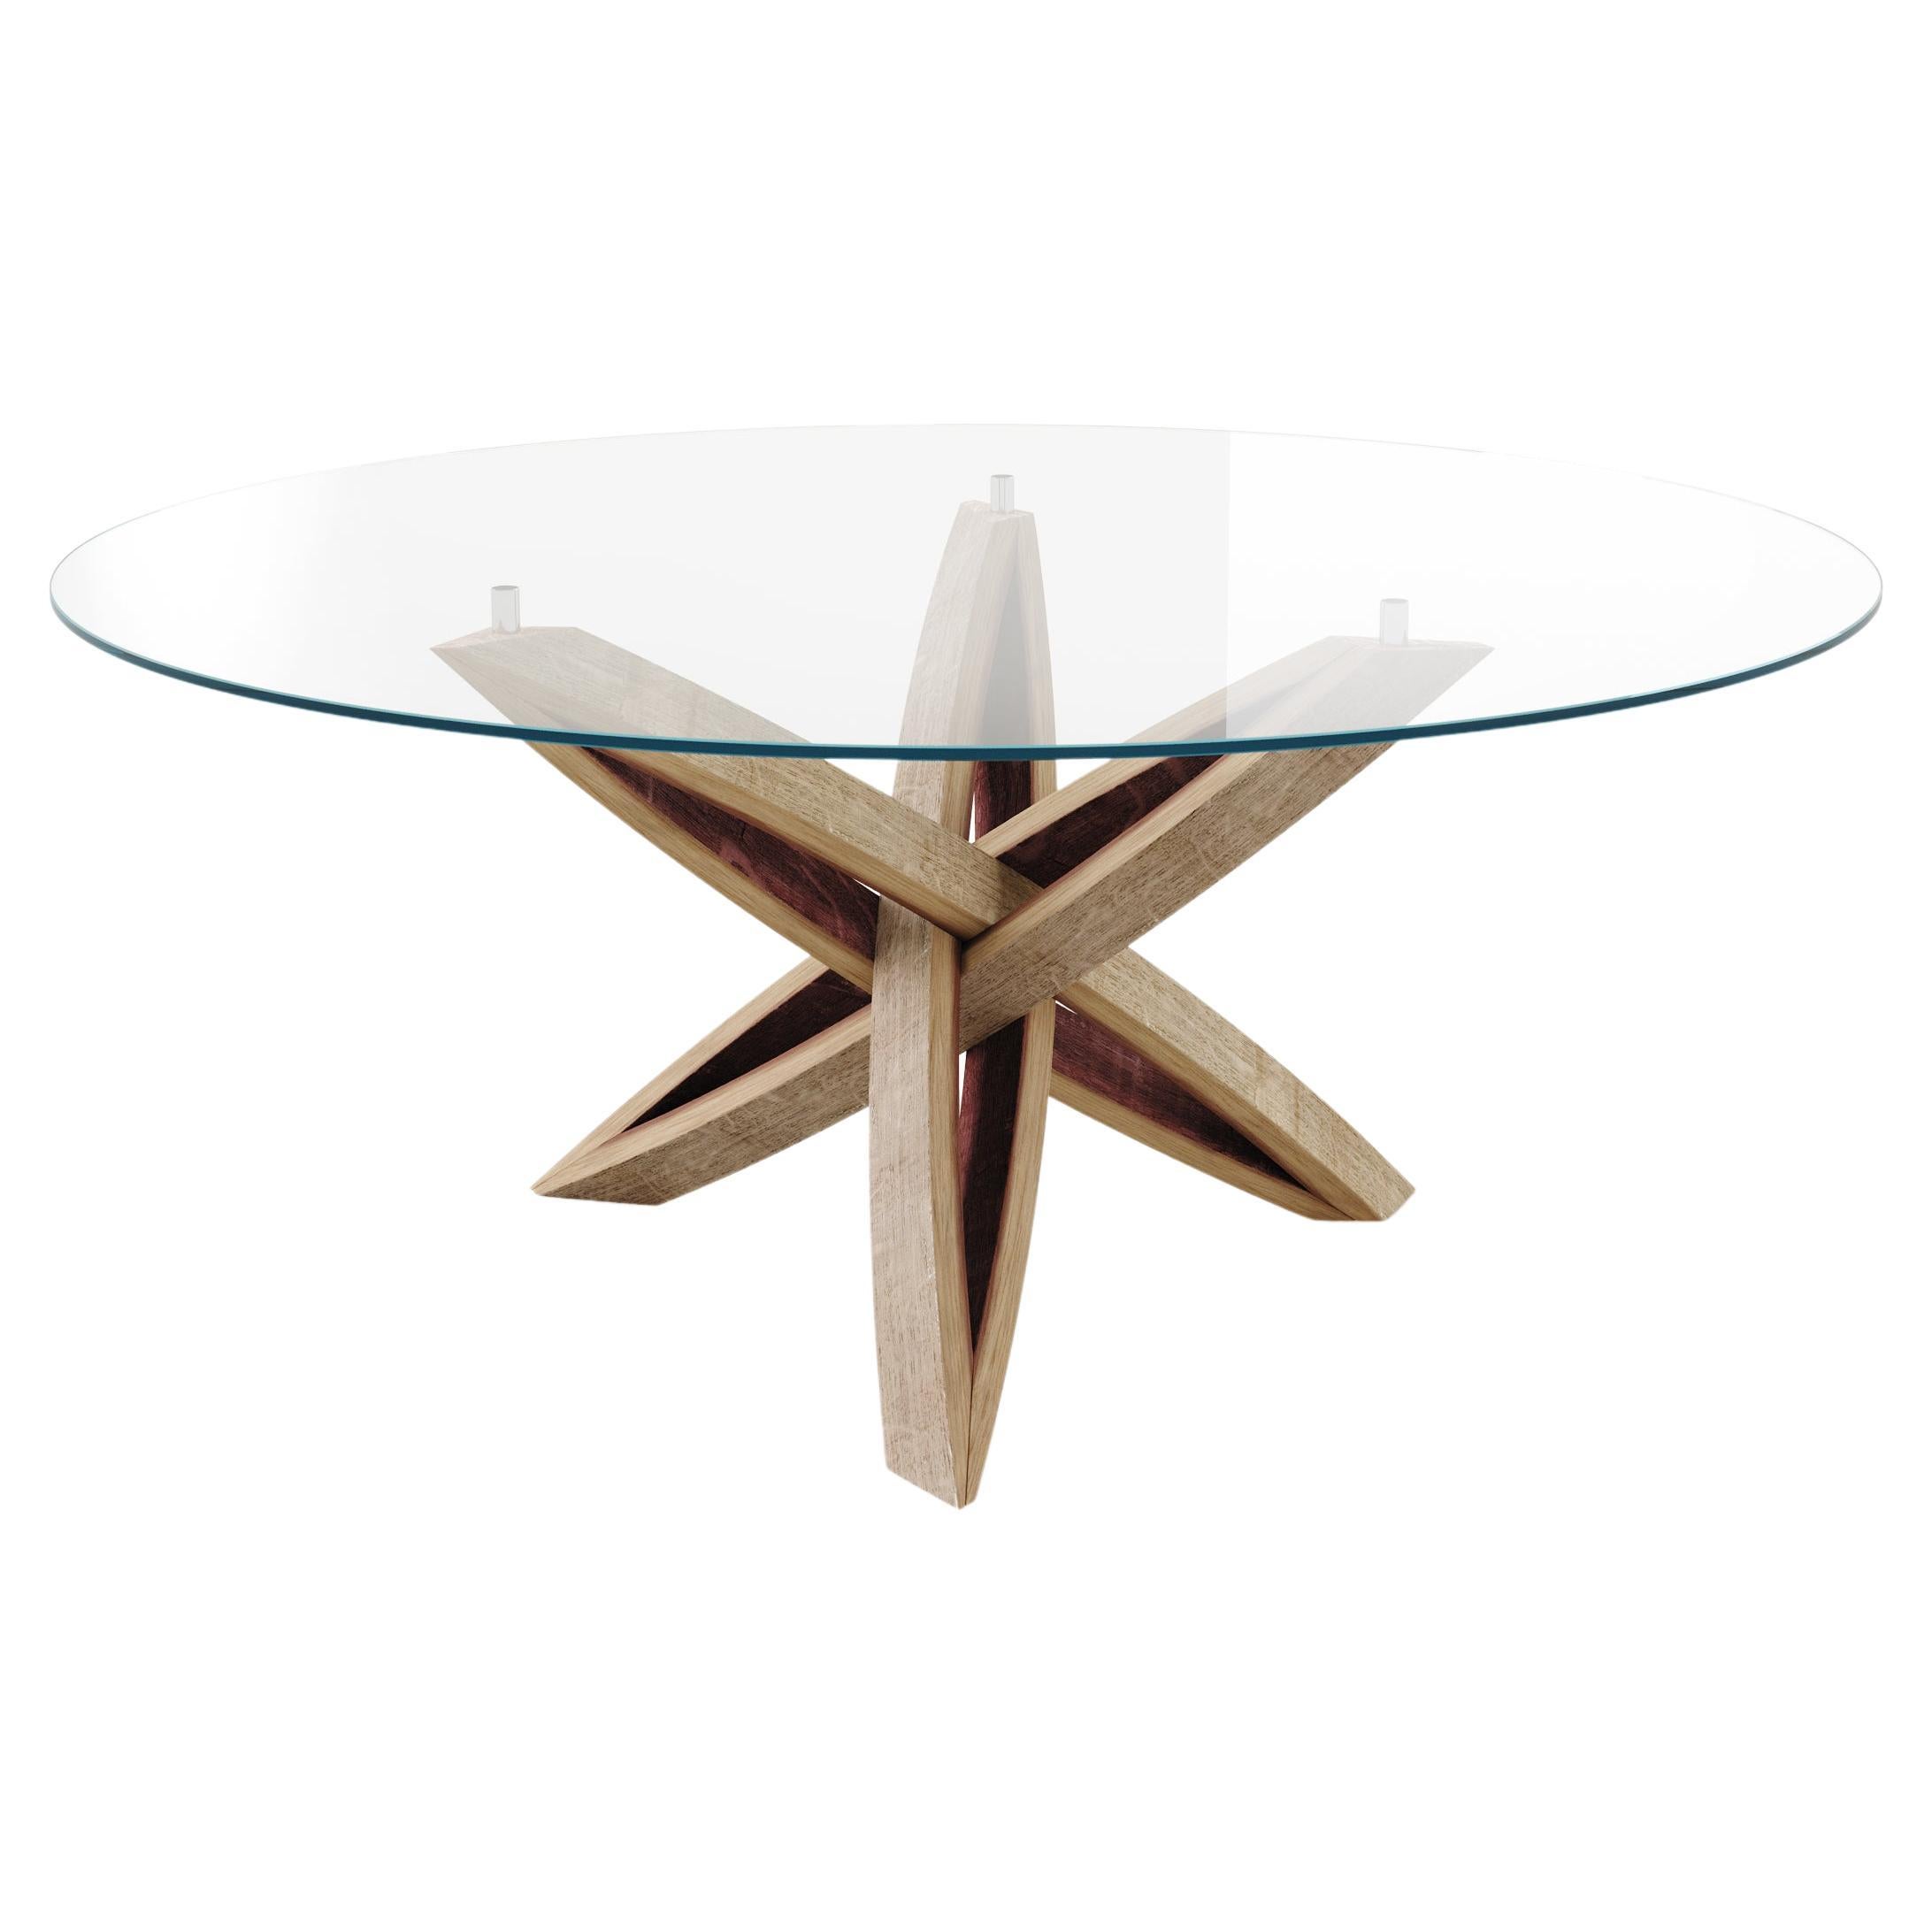 Narni coffee table by Winetage handmade in Italy For Sale